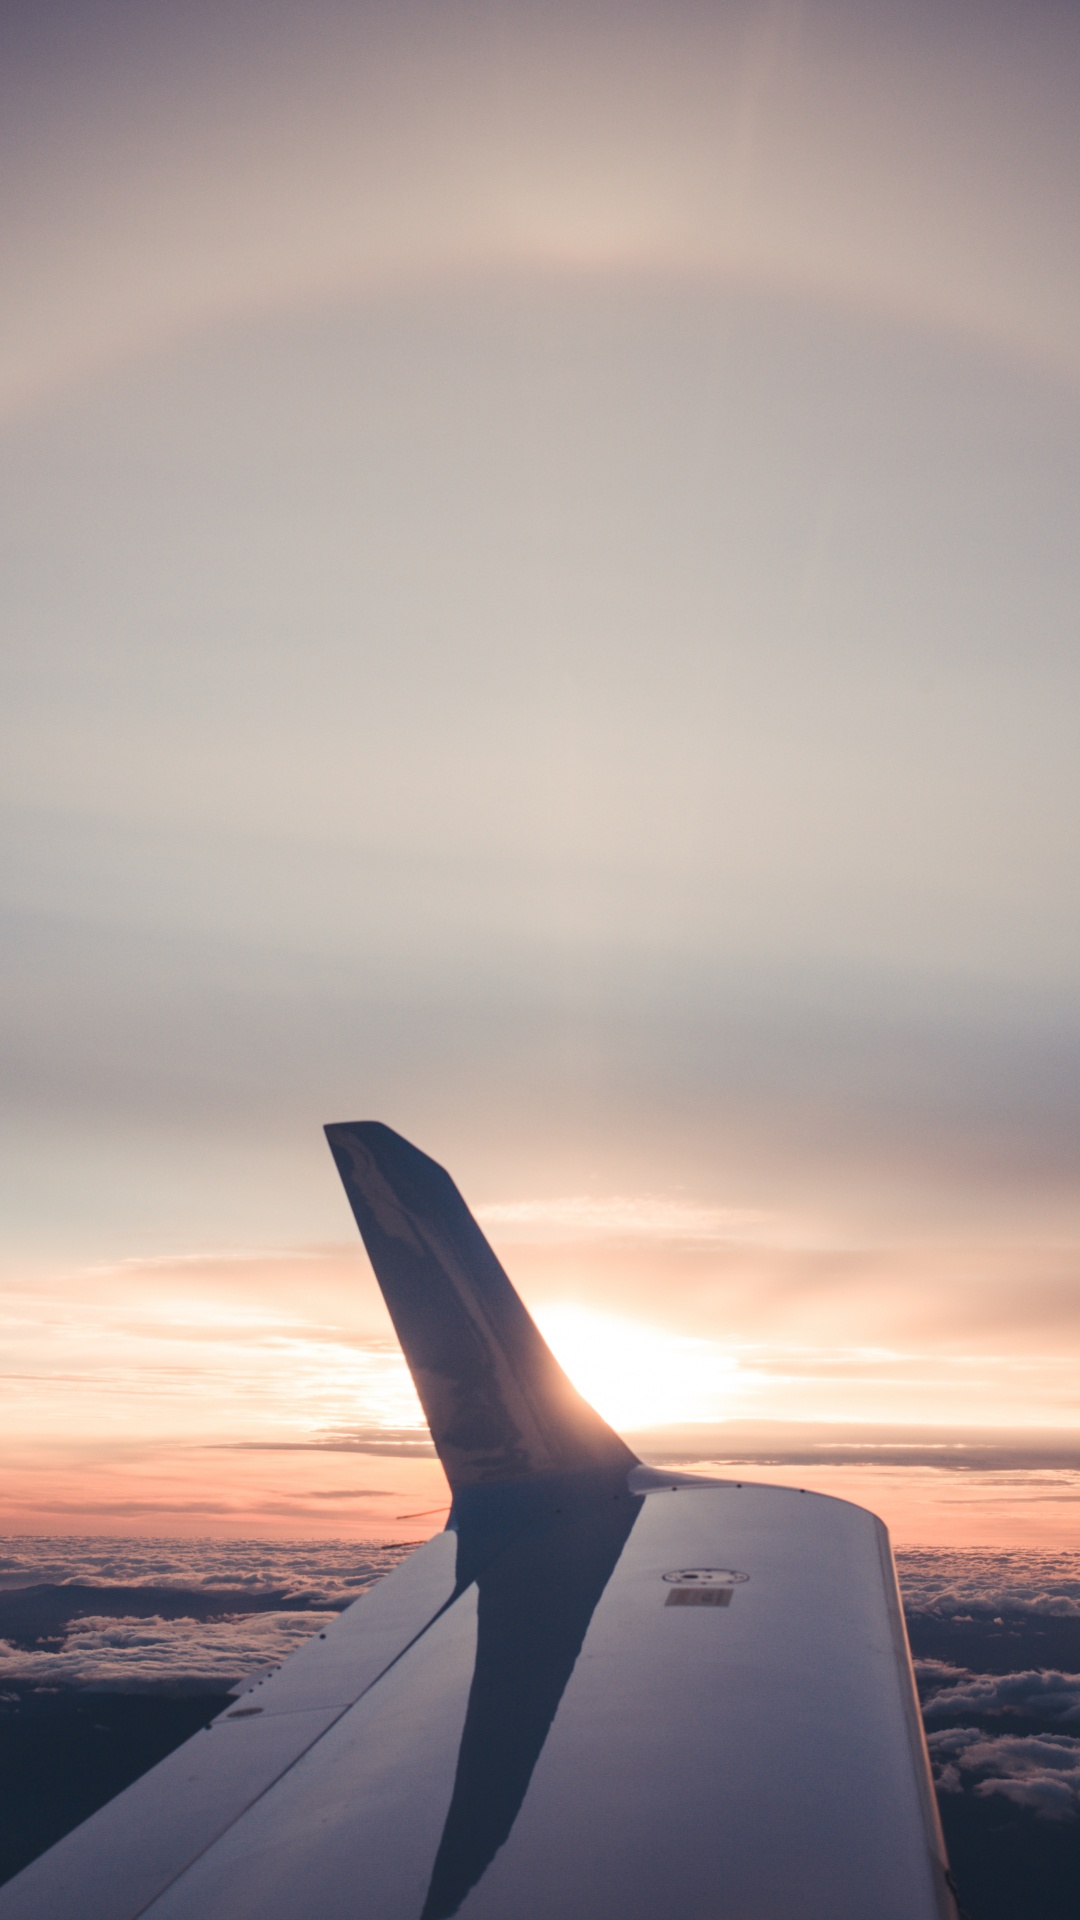 White and Black Airplane Wing During Daytime. Wallpaper in 1080x1920 Resolution